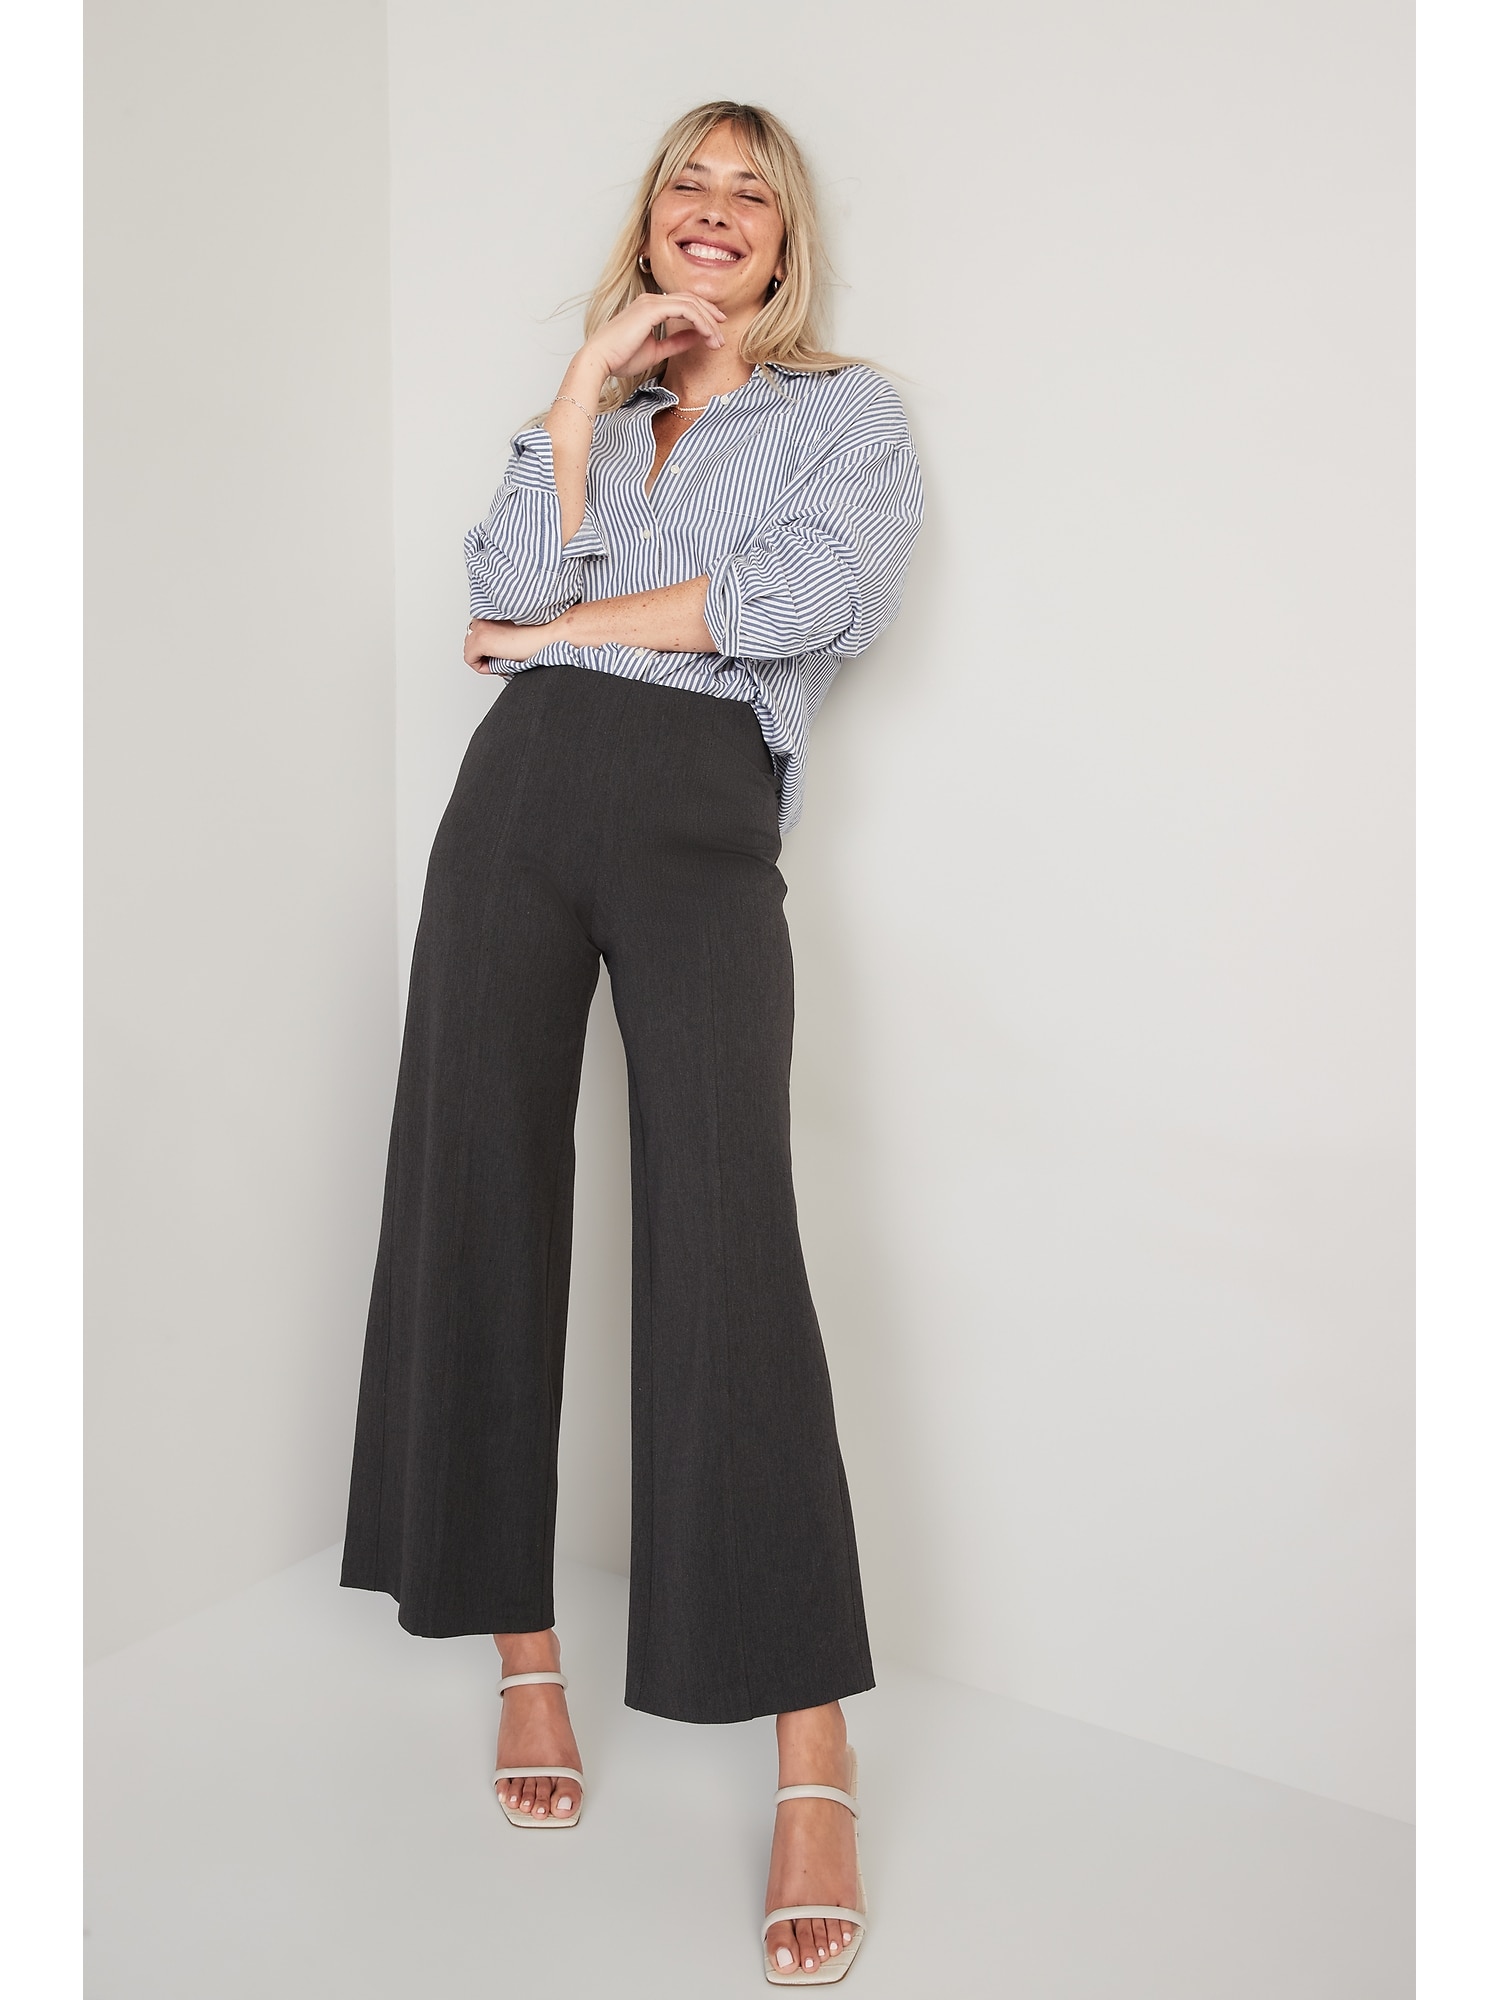 What Shoes to Wear with Wide leg Pants Outfits & Trousers - 14 Styles